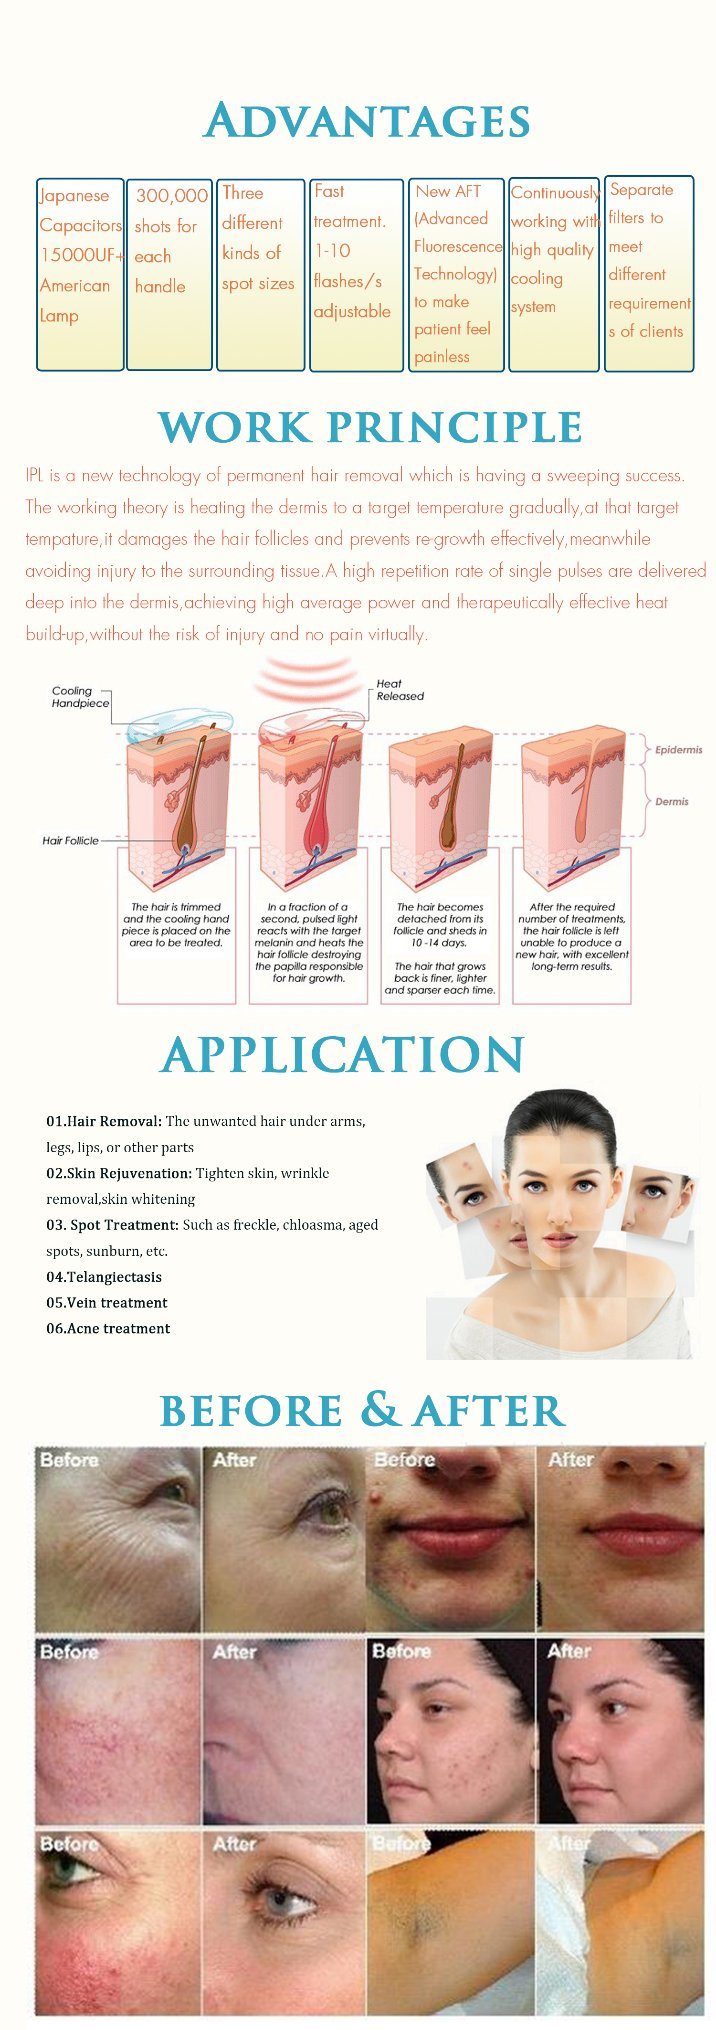 Portable IPL Shr Opt Machine for Permanent Hair Removal